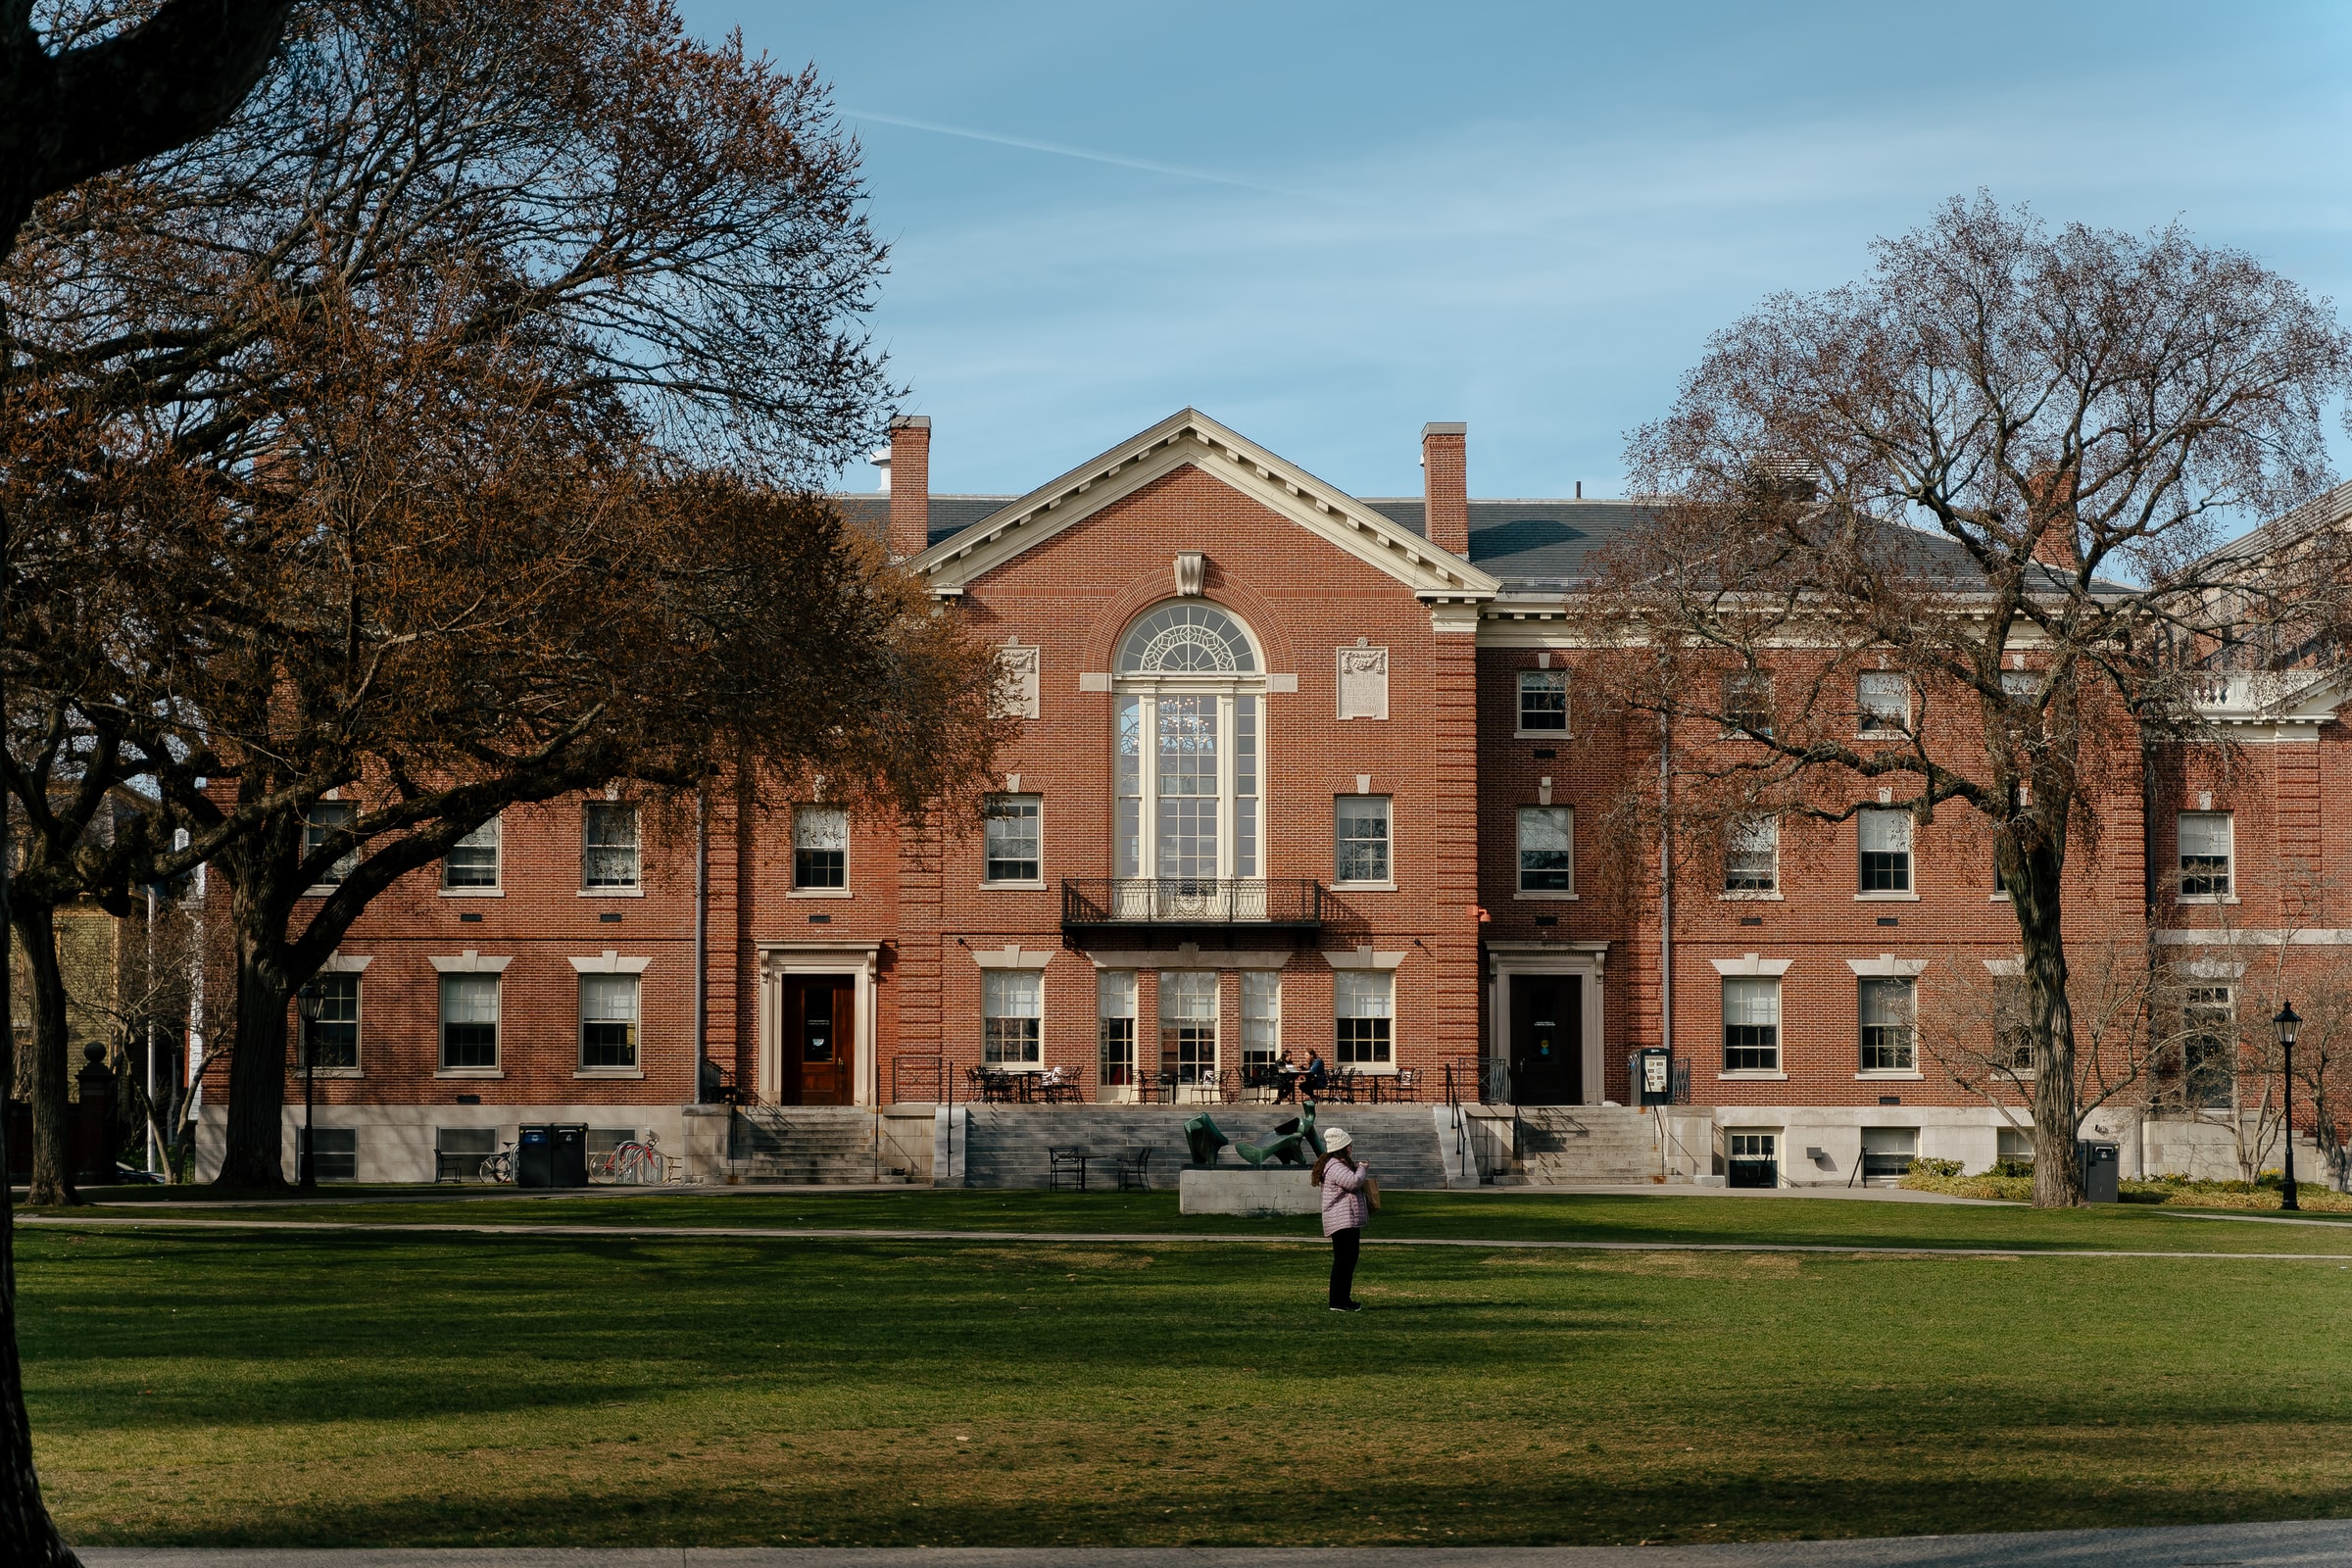 International students could study for free at this Ivy League school by 2025